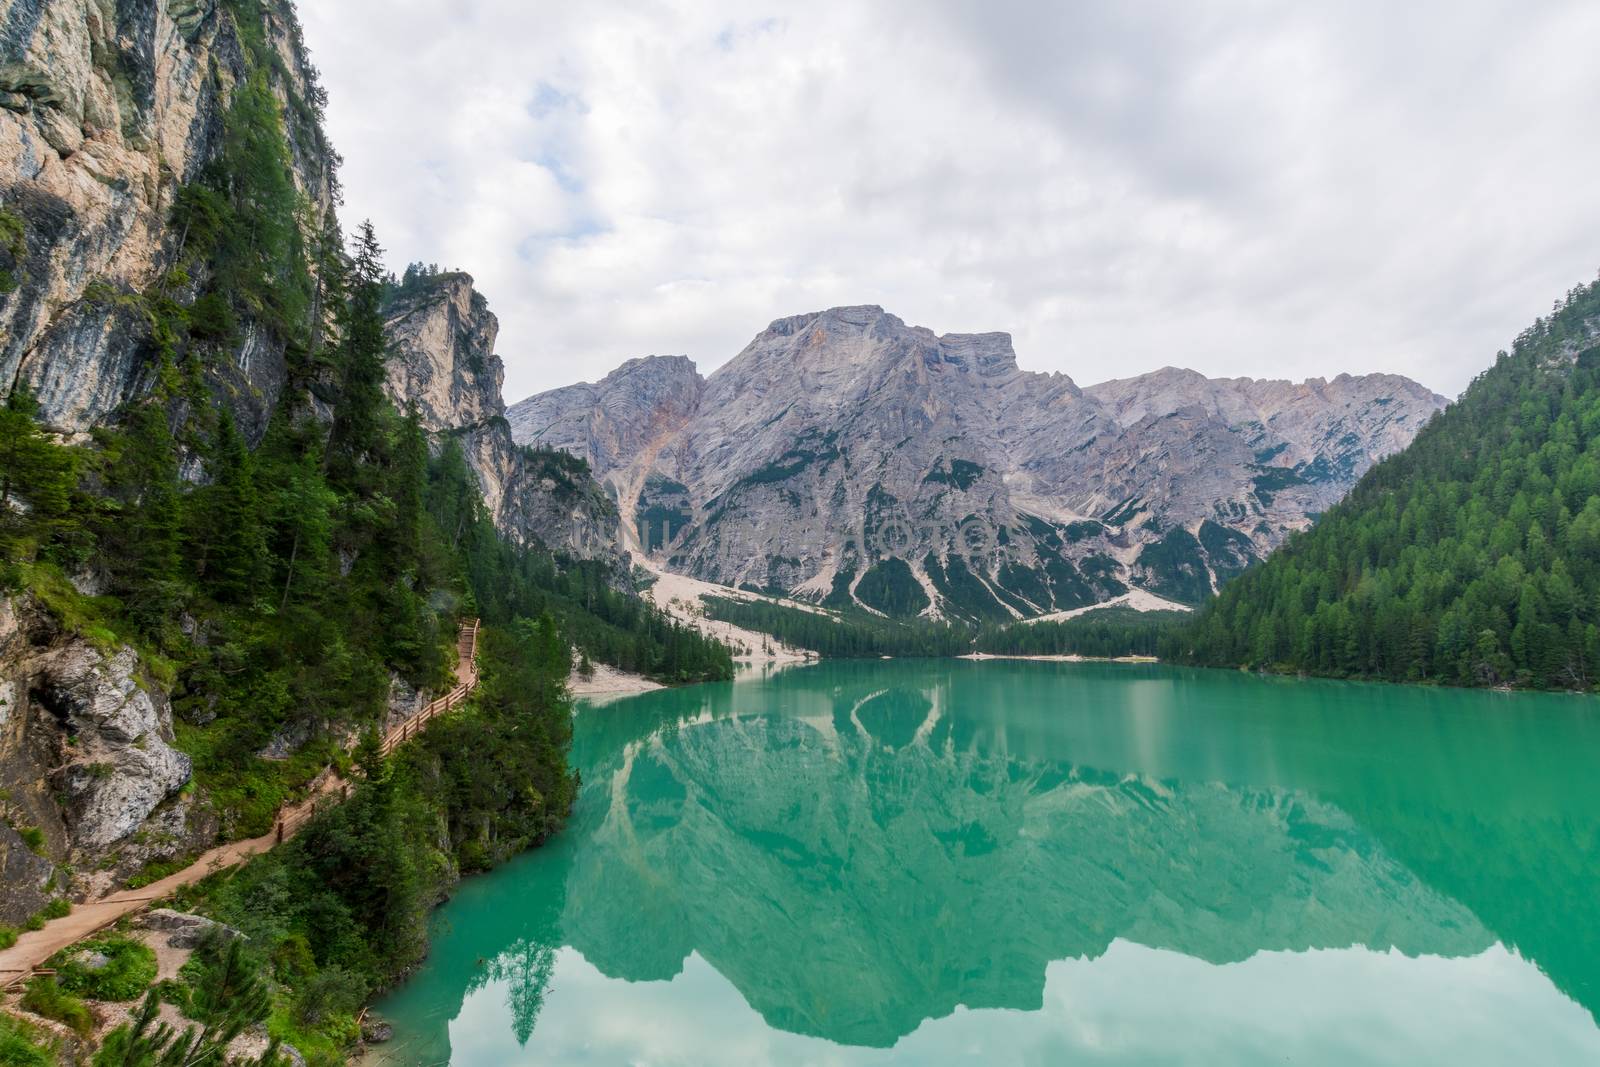 View of Lake Braies and a path that runs alongside it, in the background the Seekofel or Croda del Becco